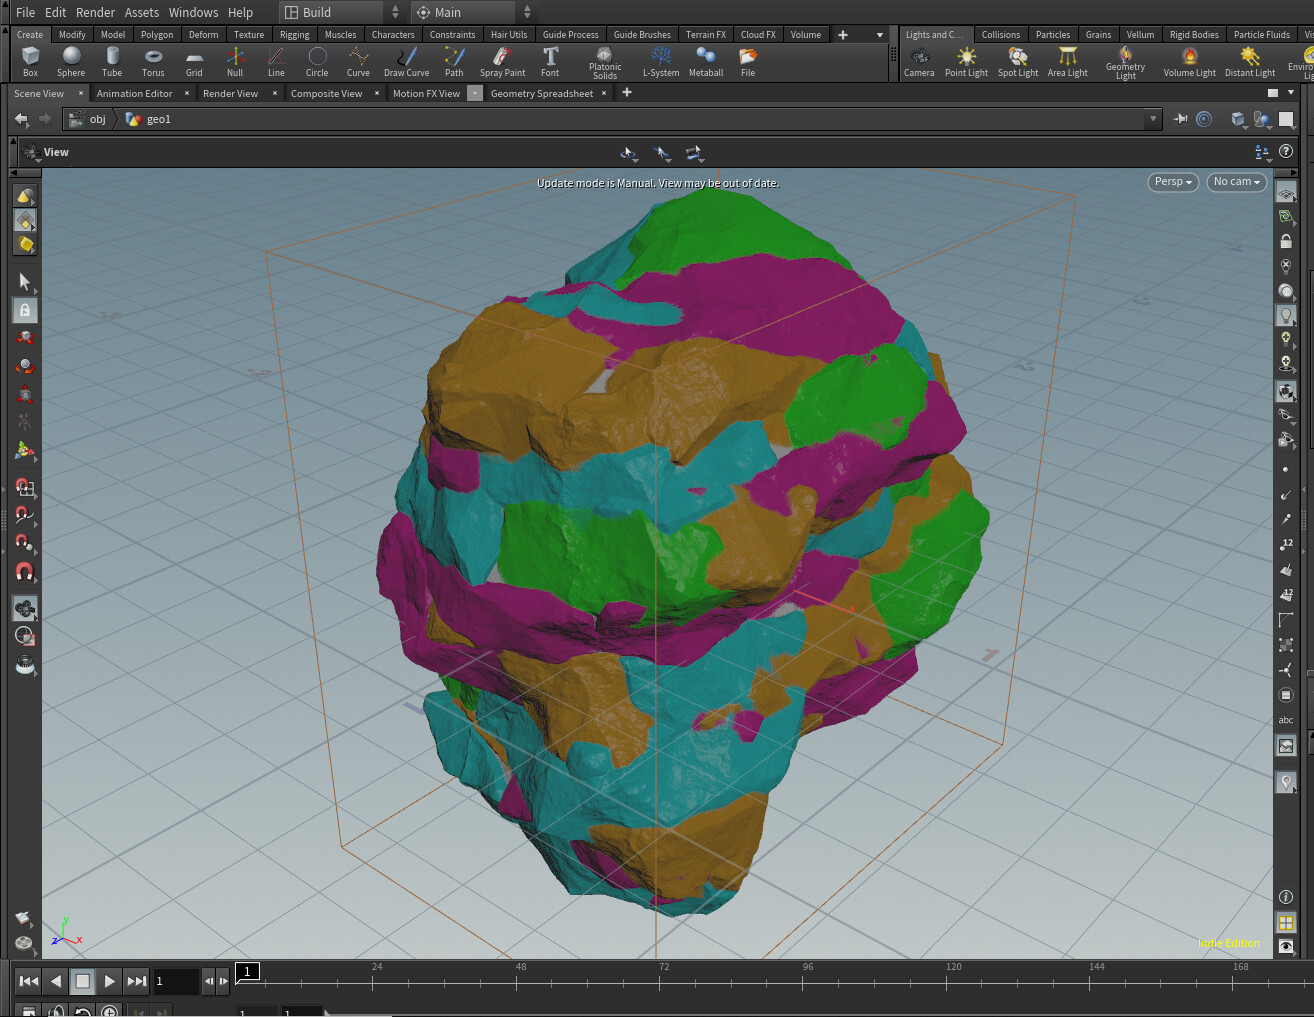 The high poly output includes vertex color in order to bake a chunk id mask.